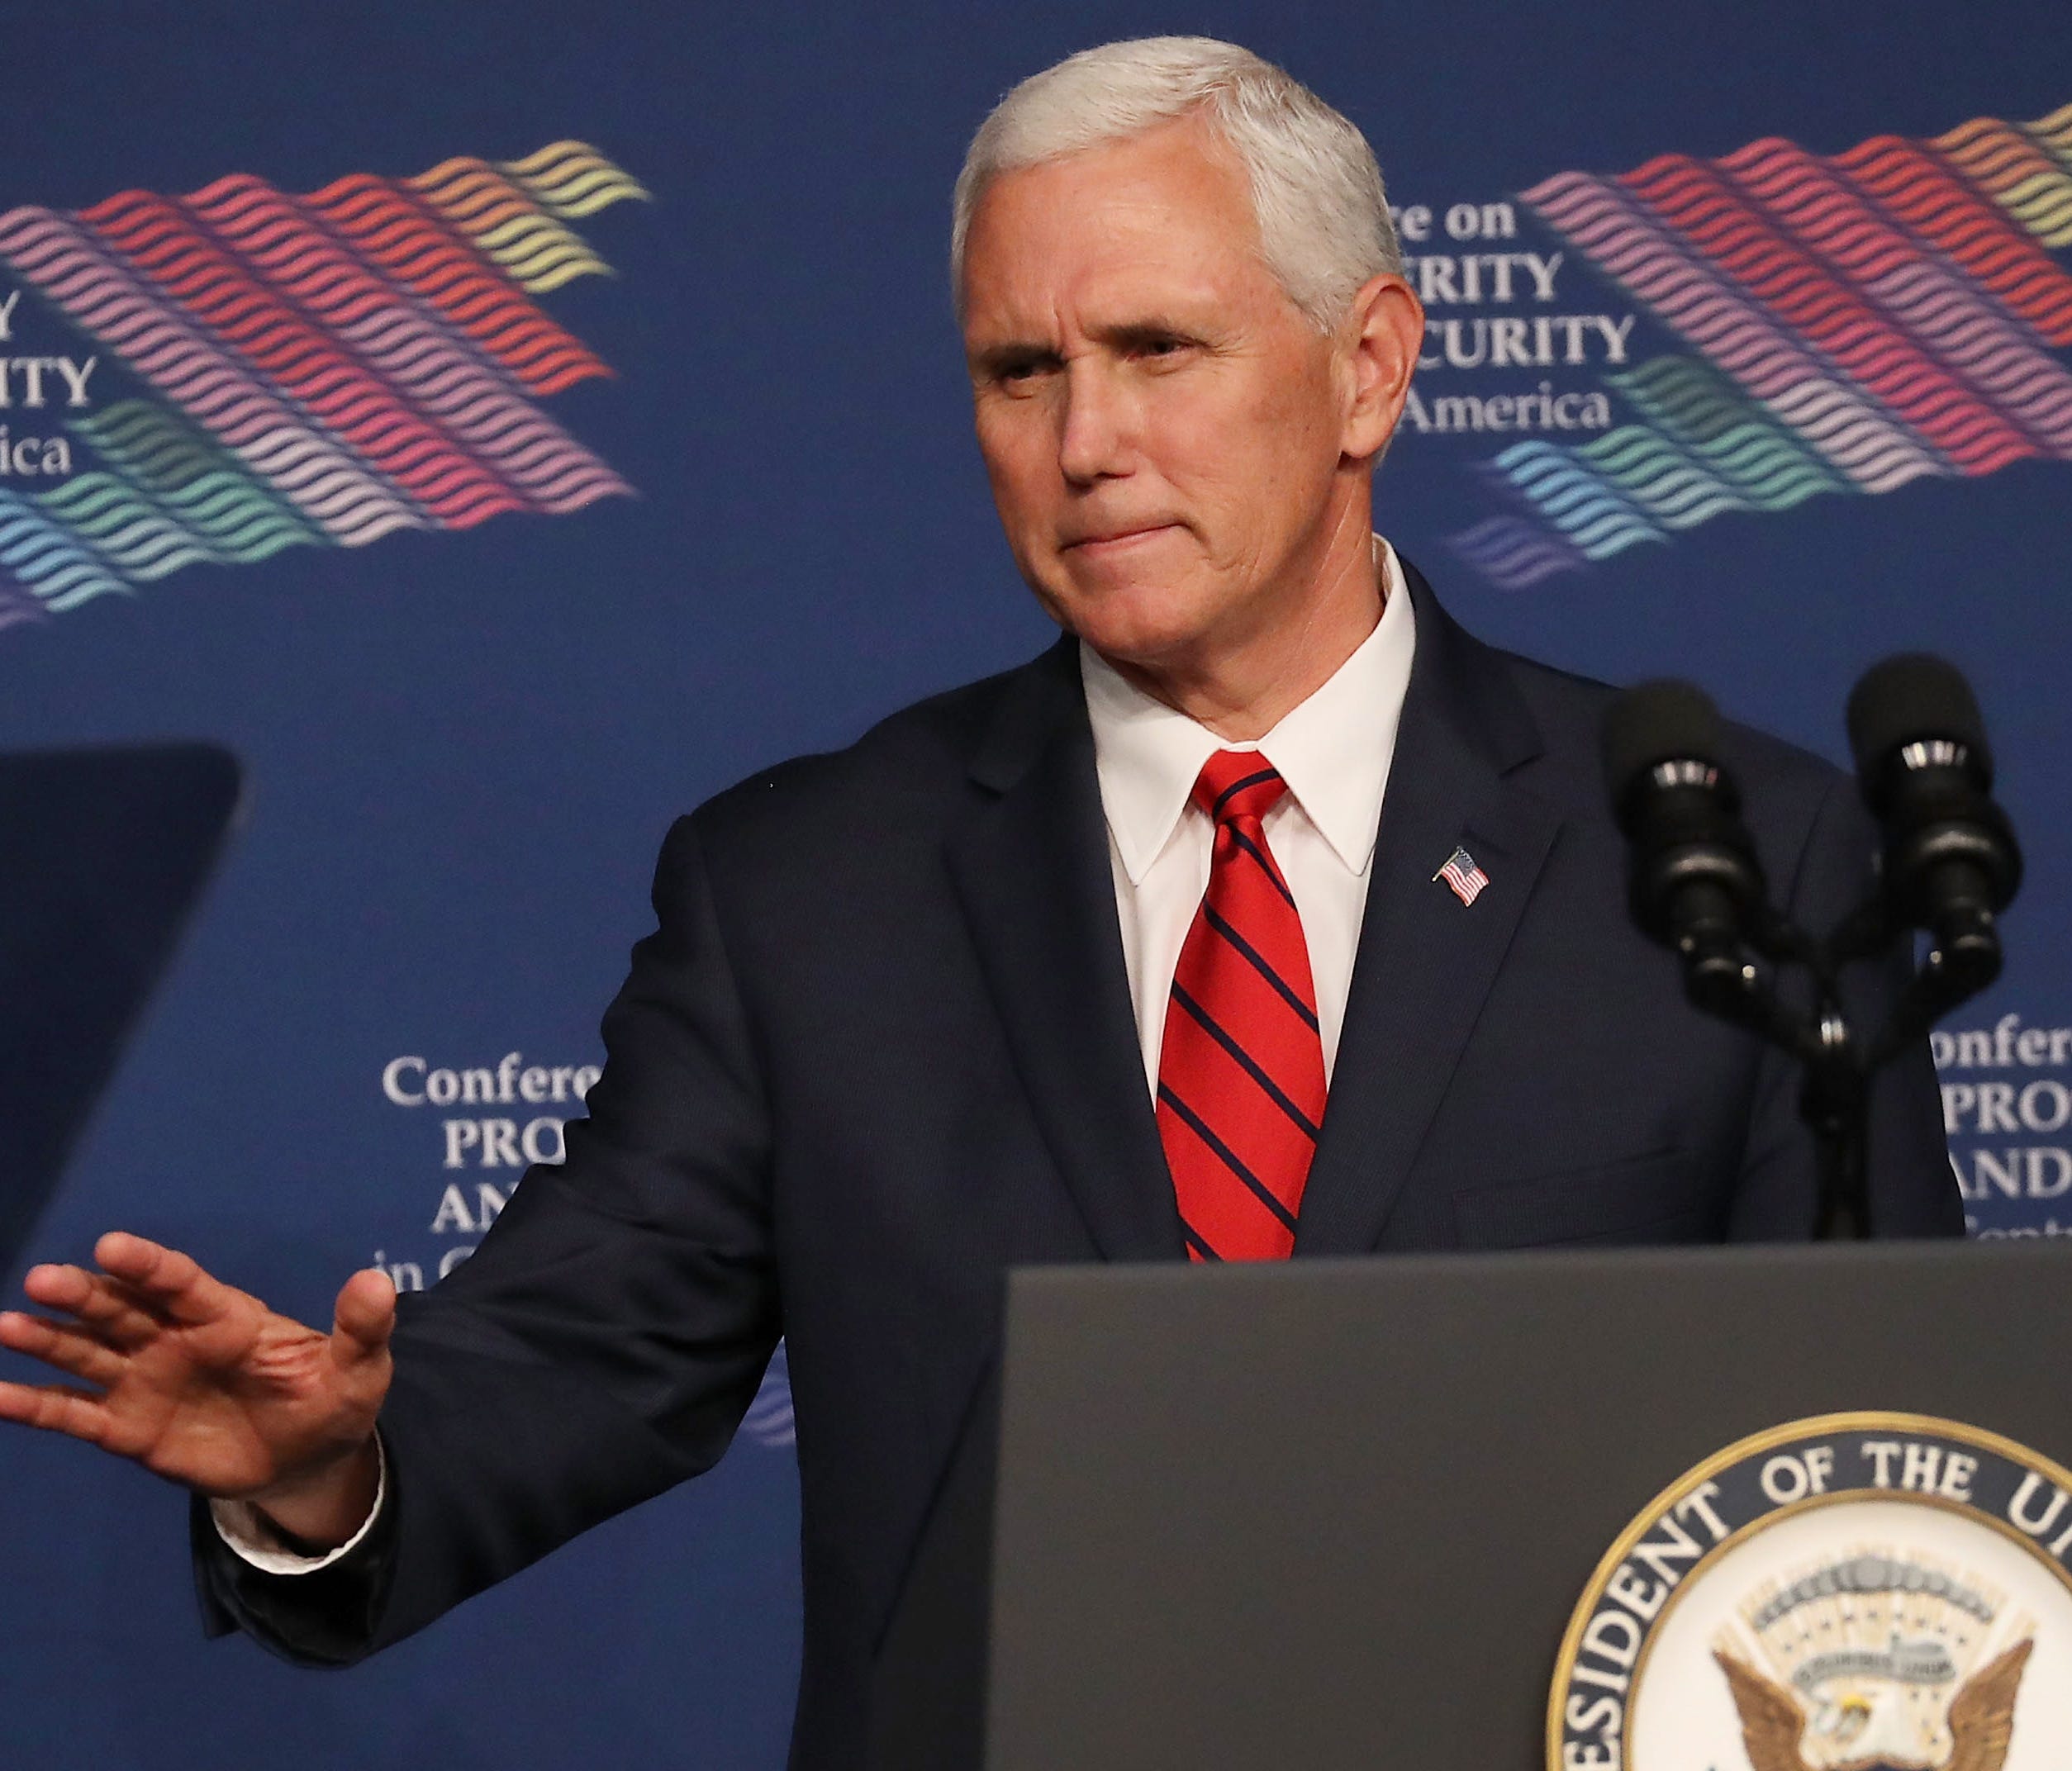 Vice President Mike Pence is pictured speaking during the Conference on Prosperity and Security in Central America at the Florida International University.